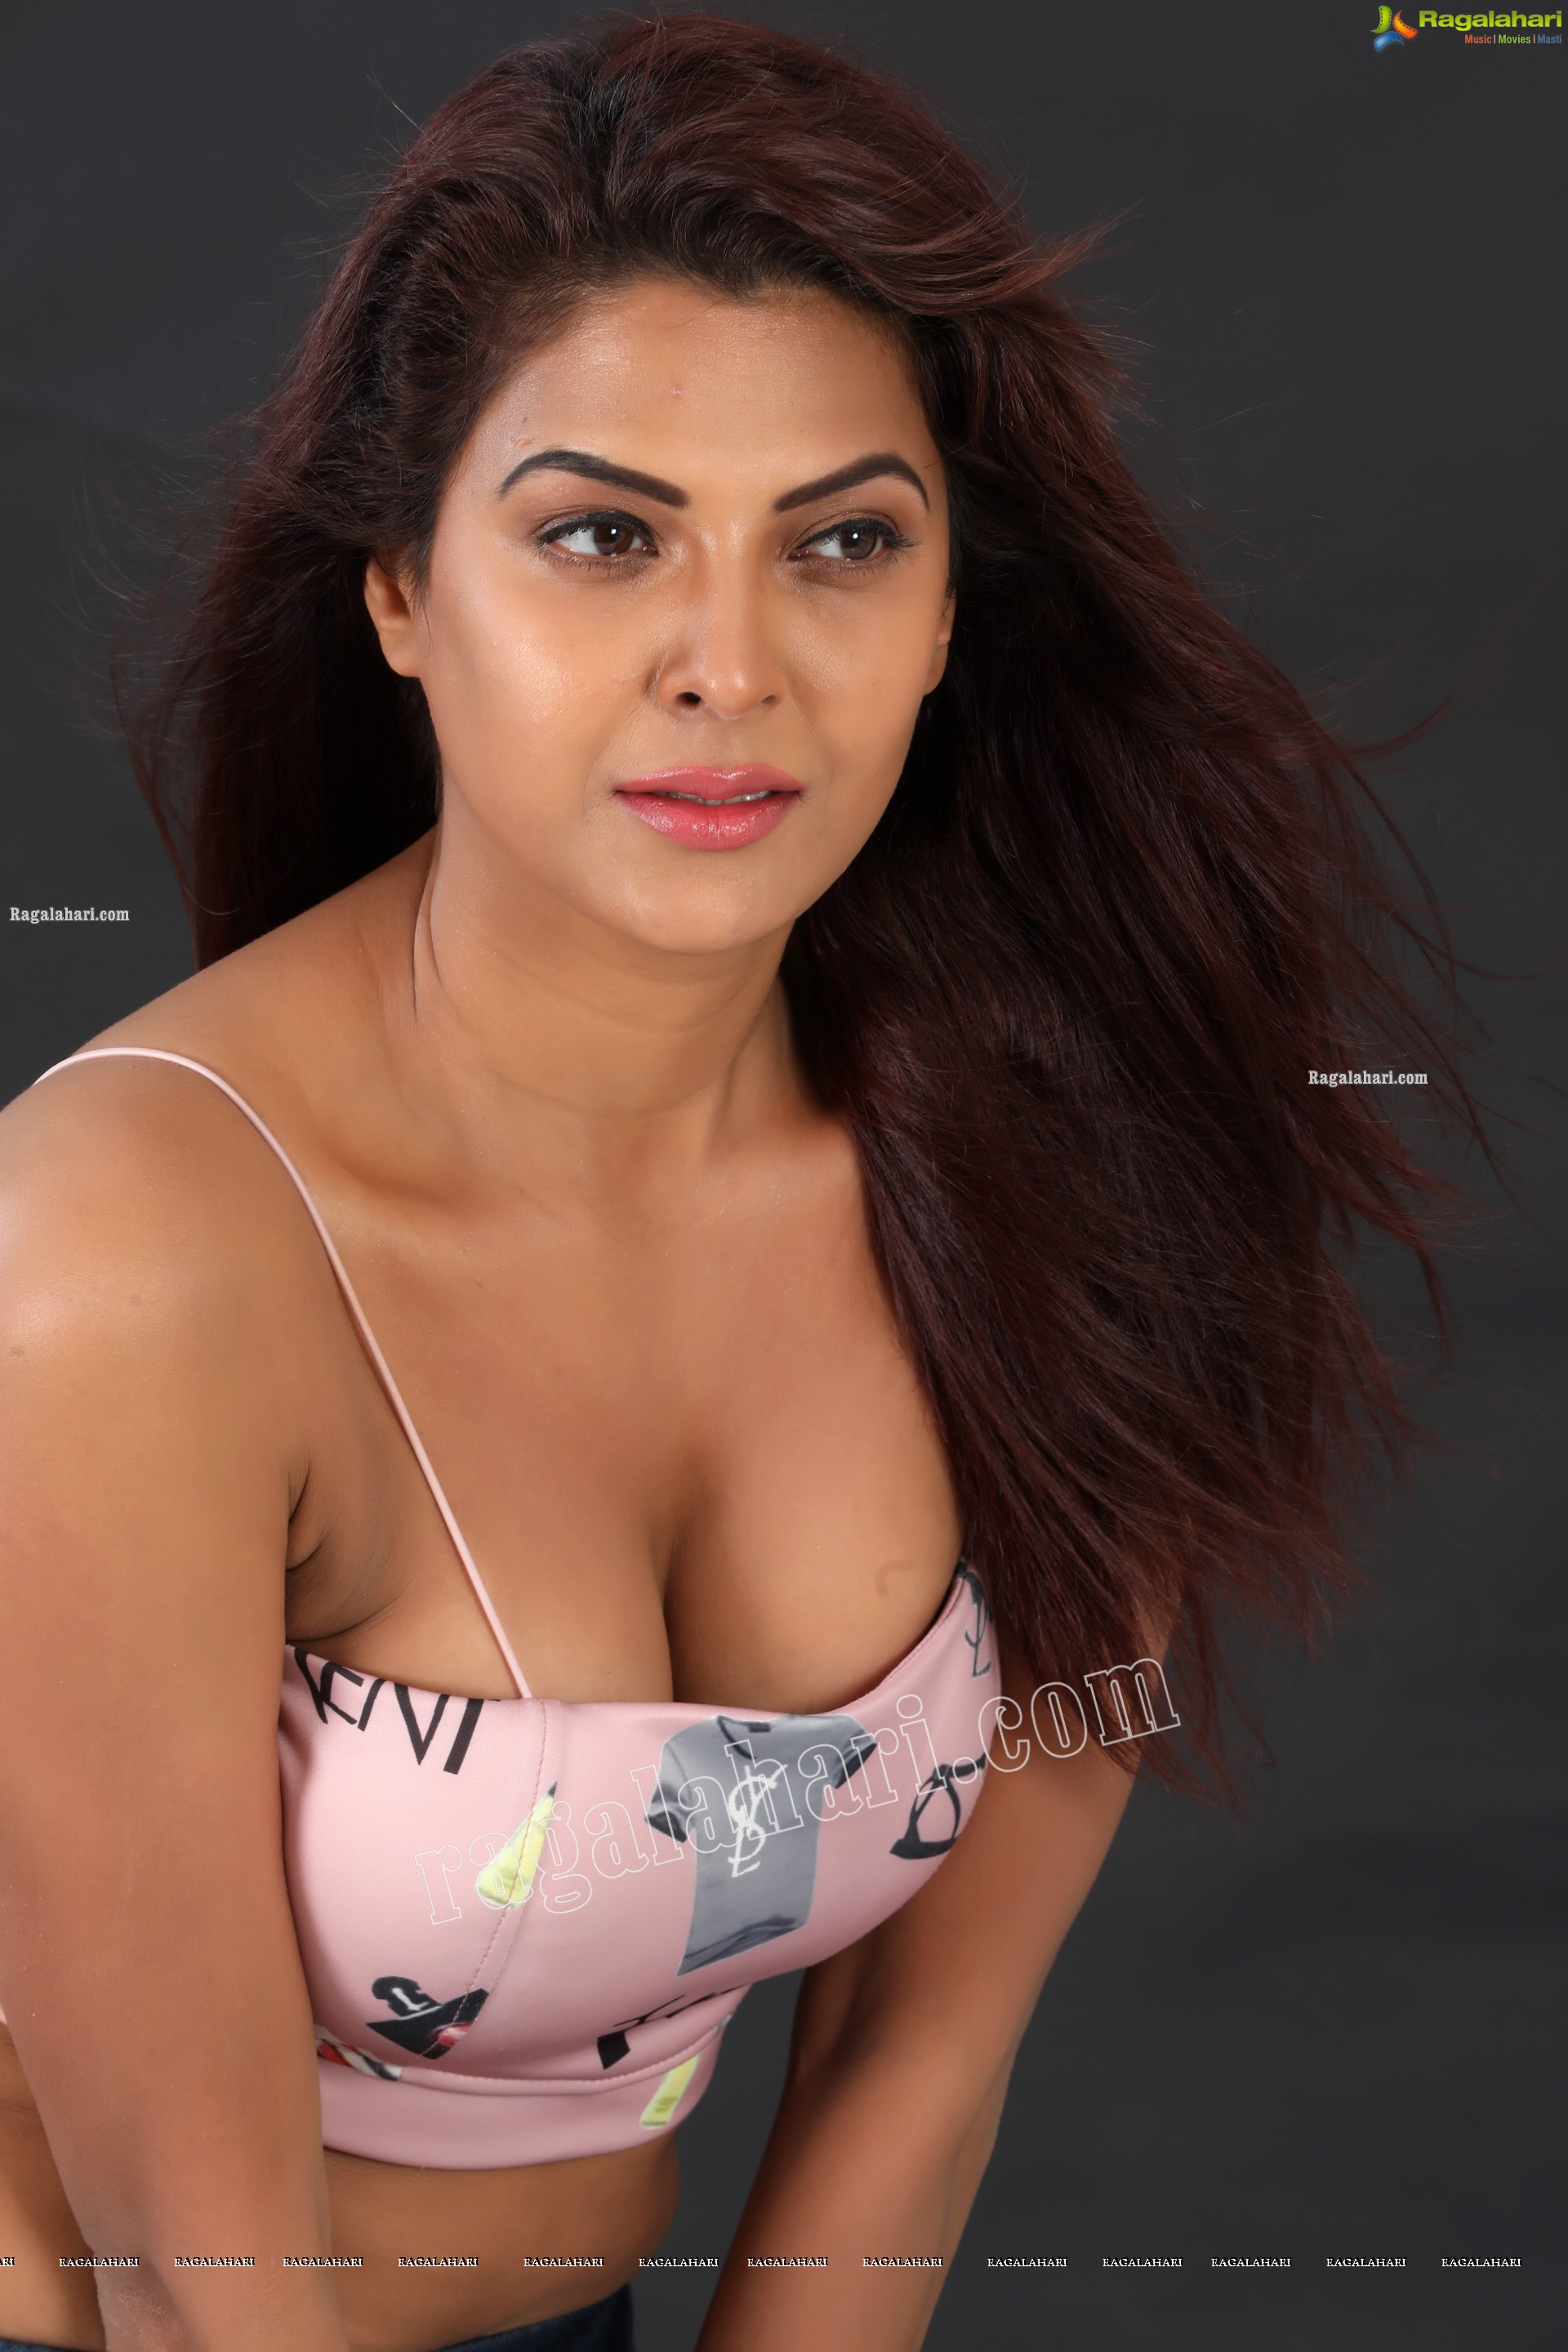 Kashish Singh In Spaghetti Strap Crop Top and Jeans, Exclusive Photo Shoot